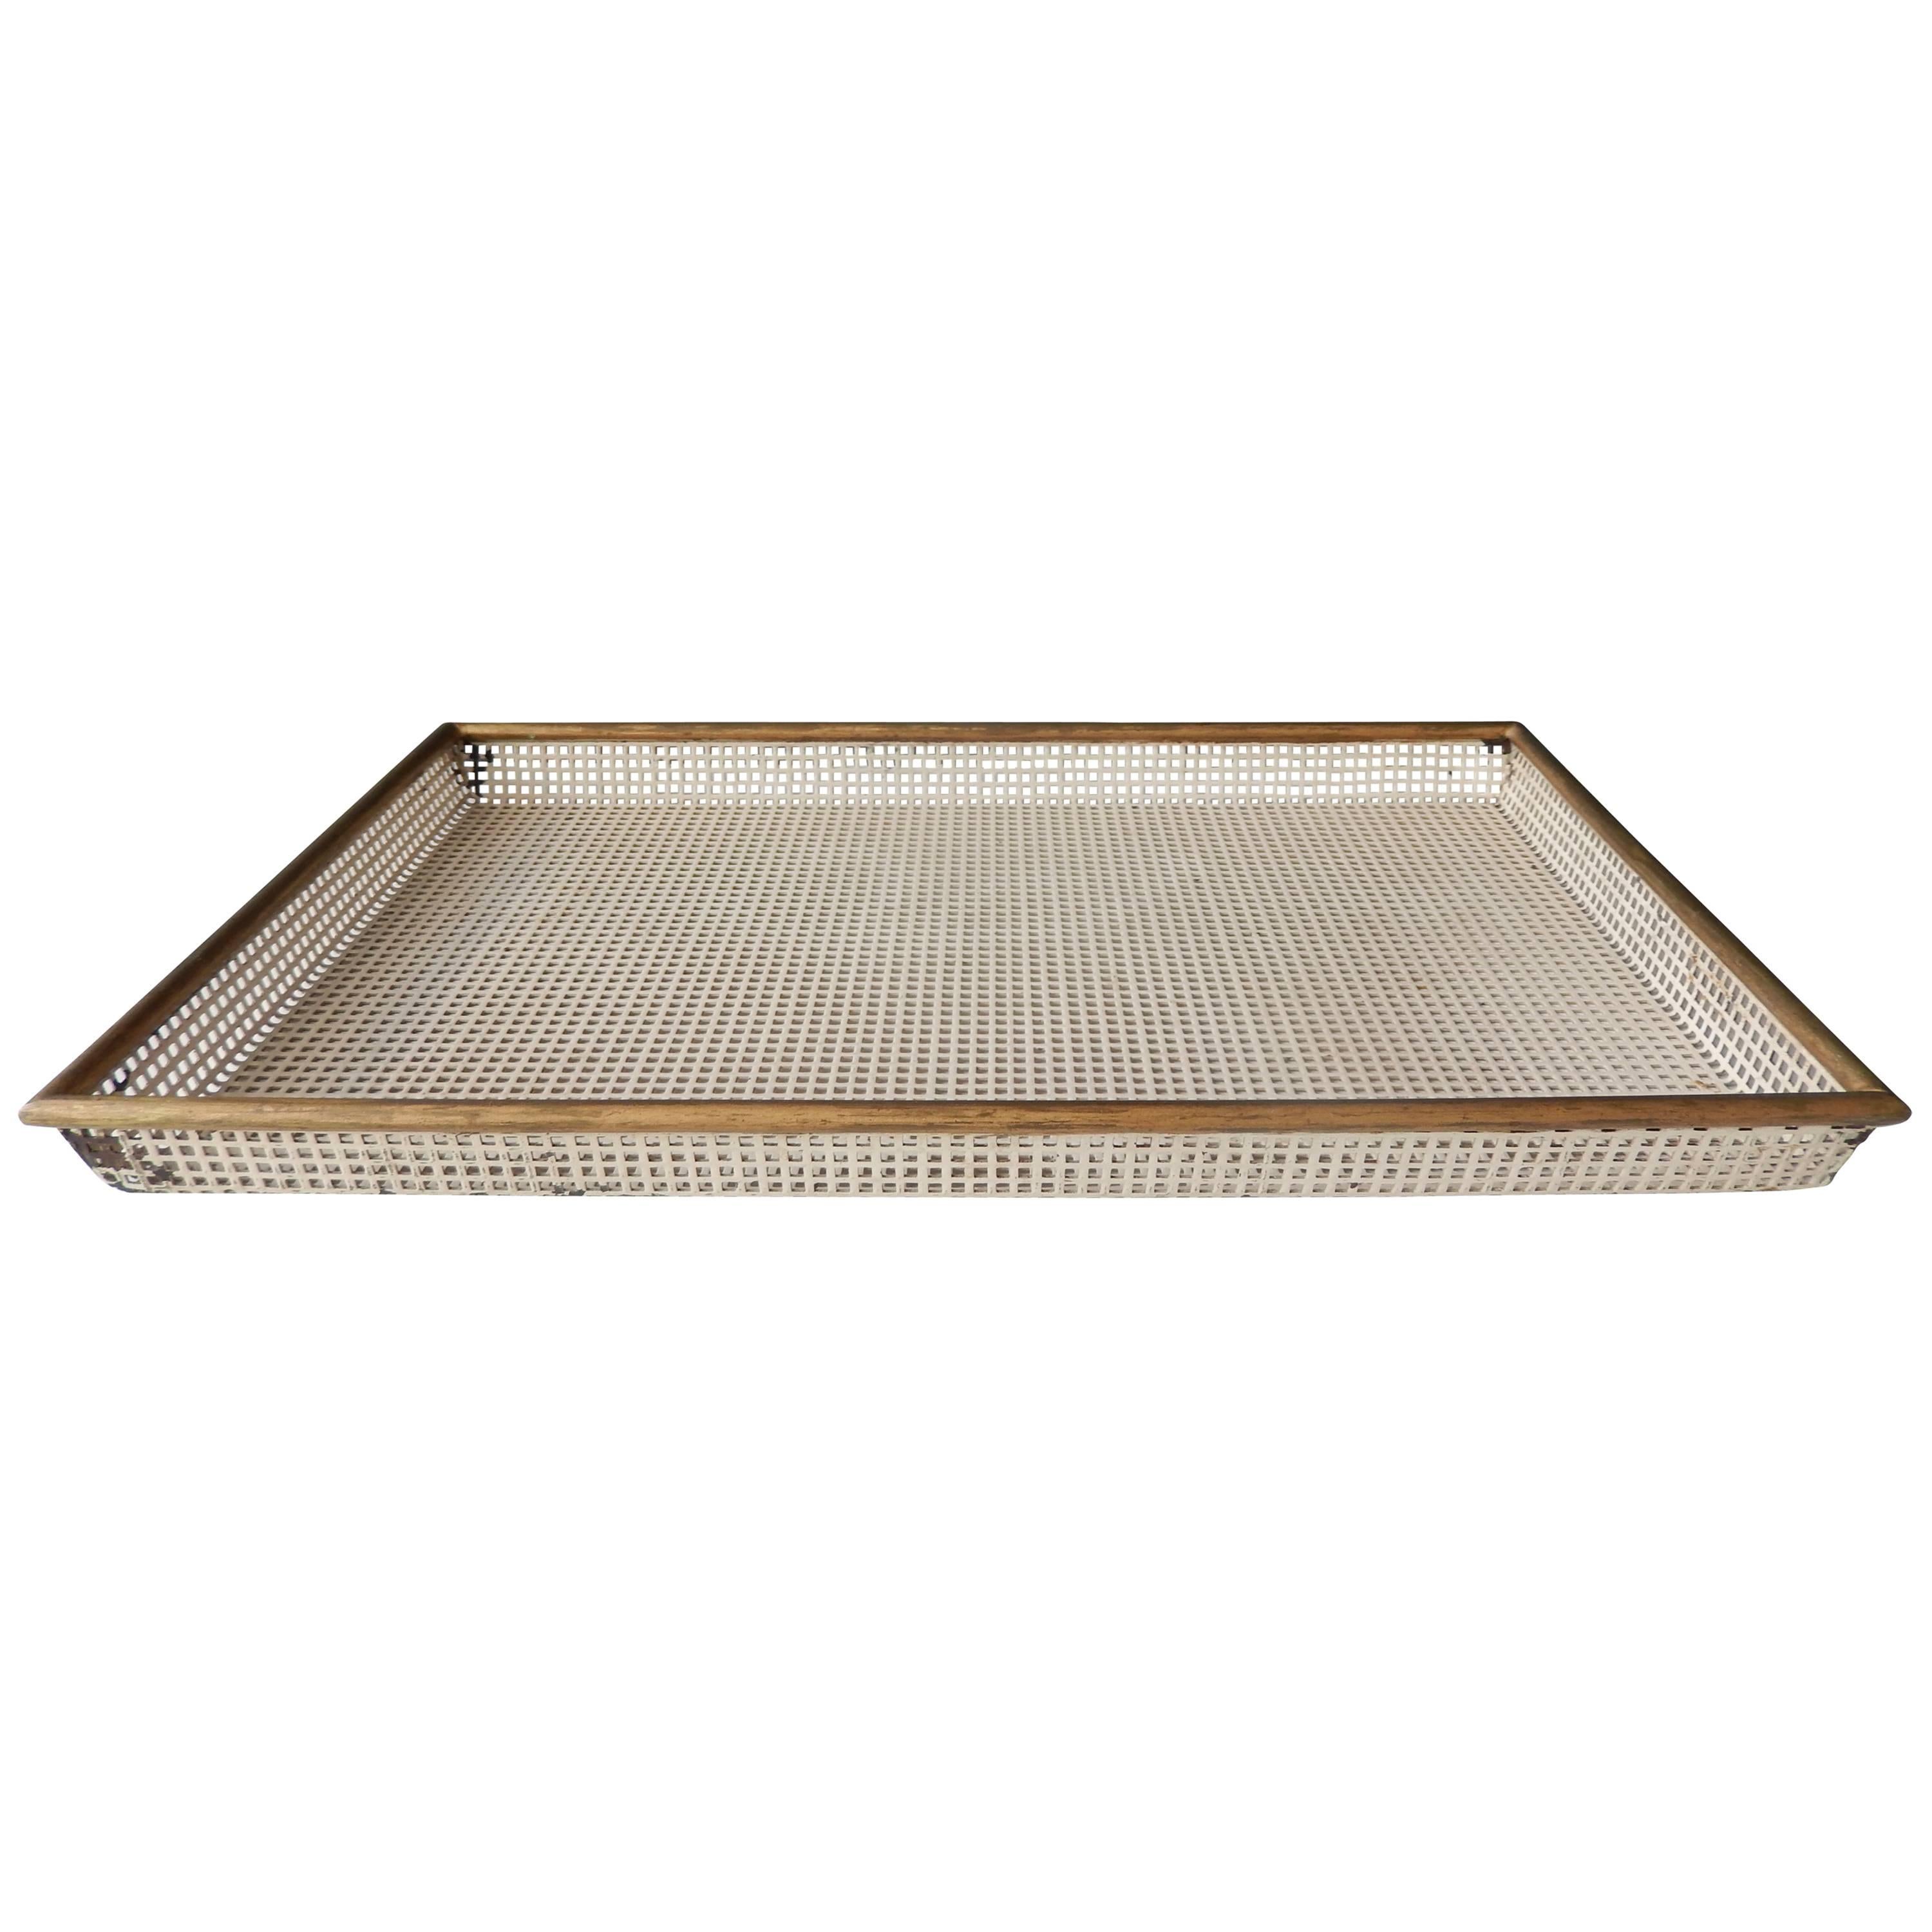 An elegant, modernist tray (plateau fantaisie) by the renowned, Mid-Century French designer Mathieu Matégot (1910-2001). Matégot pioneered the use of perforated sheet metal and lacquered steel in his furniture and decorative objects. Manufactured